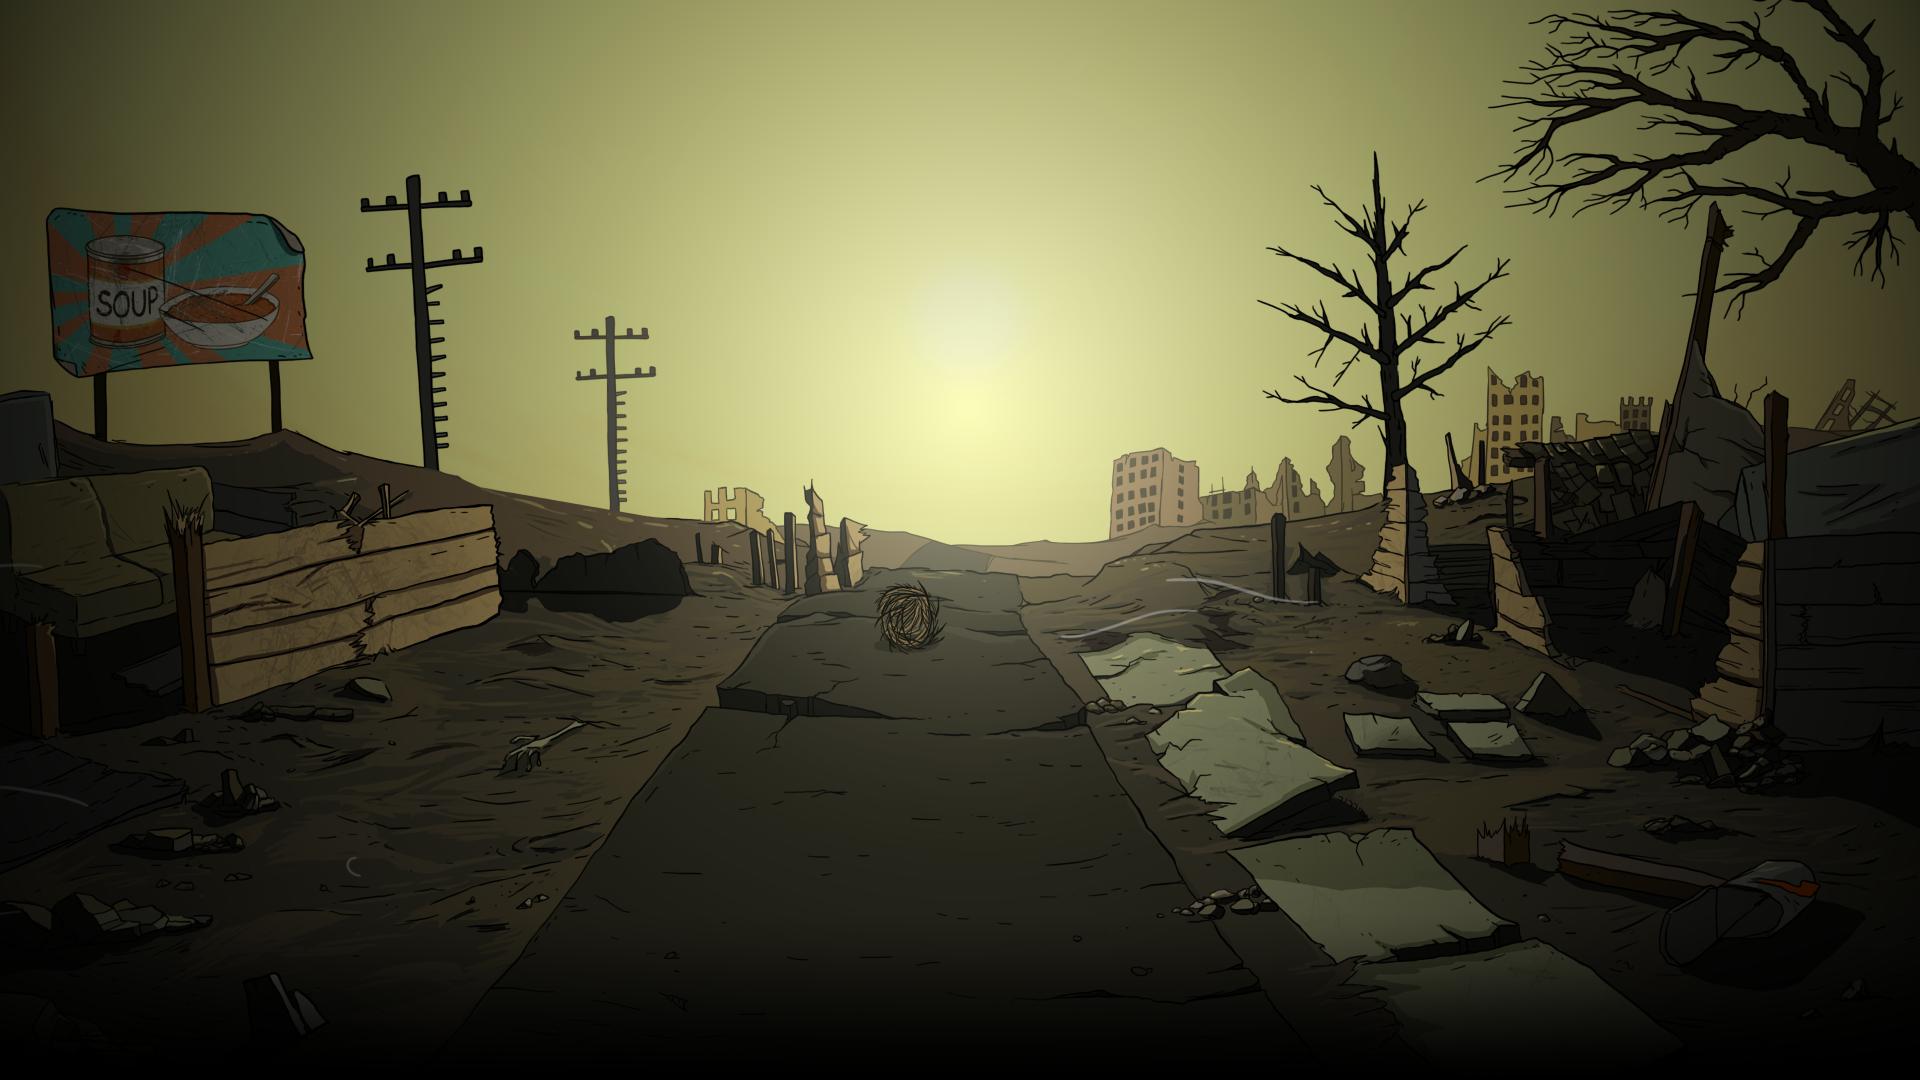 60 seconds nuclear apocalypse game unblocked